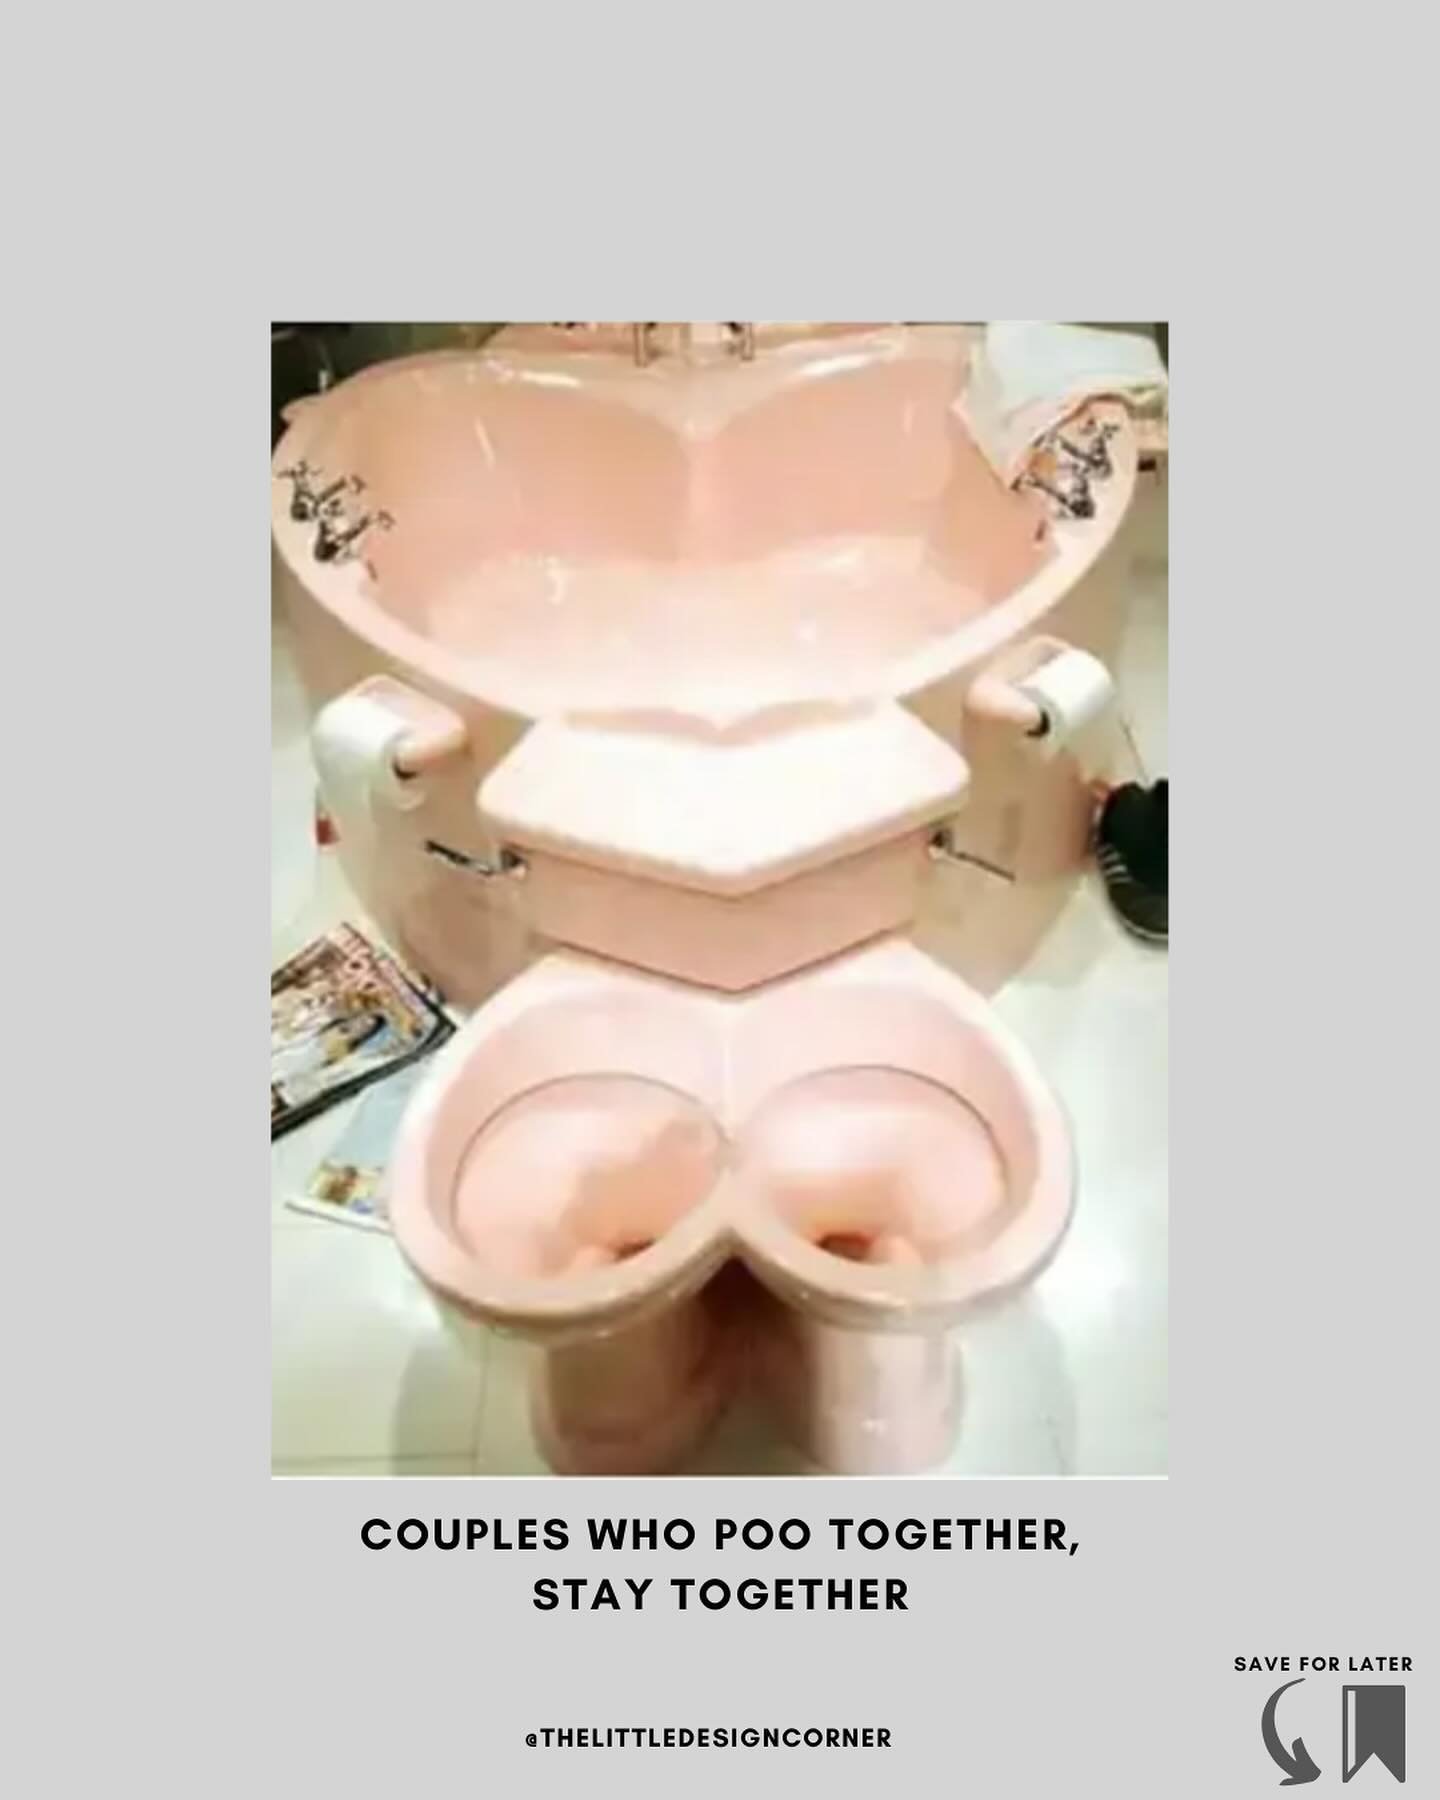 Interesting design choices (Part 5 - weird toilets edition!) 🤣🤦🏻&zwj;♀️😳

Also - if you&rsquo;re new here&hellip;

👋 Follow me&nbsp;@thelittledesigncorner&nbsp;and binge all the other content I have to help you start, grow and scale a profitable